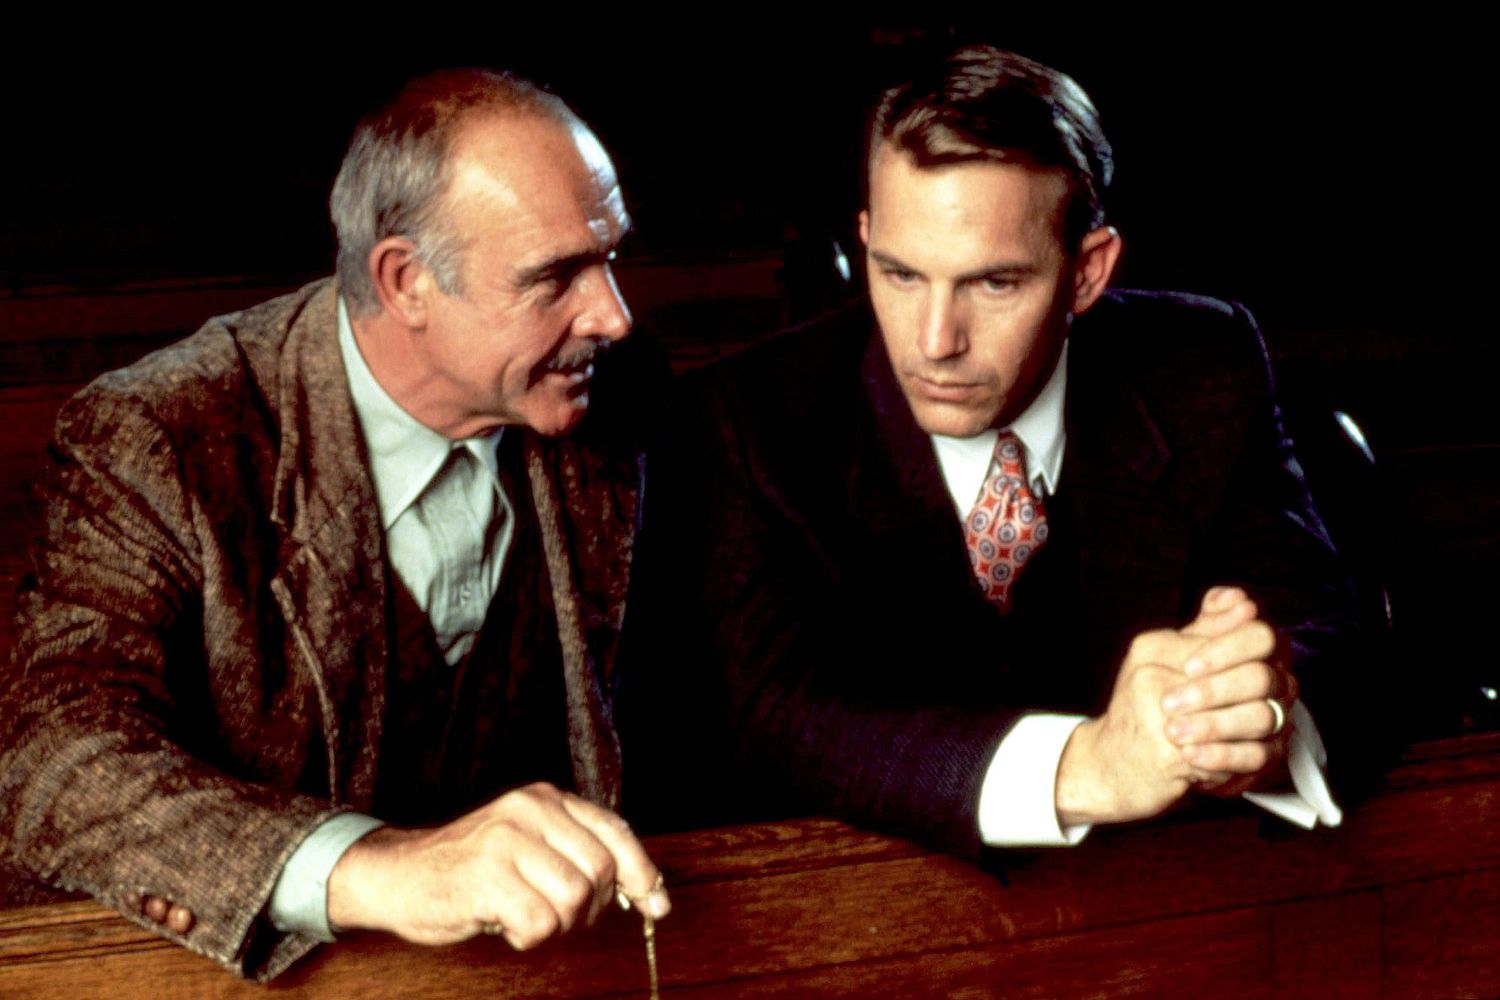 THE UNTOUCHABLES, Sean Connery, Kevin Costner, 1987. (c) Paramount Pictures/ Courtesy: Everett Colle